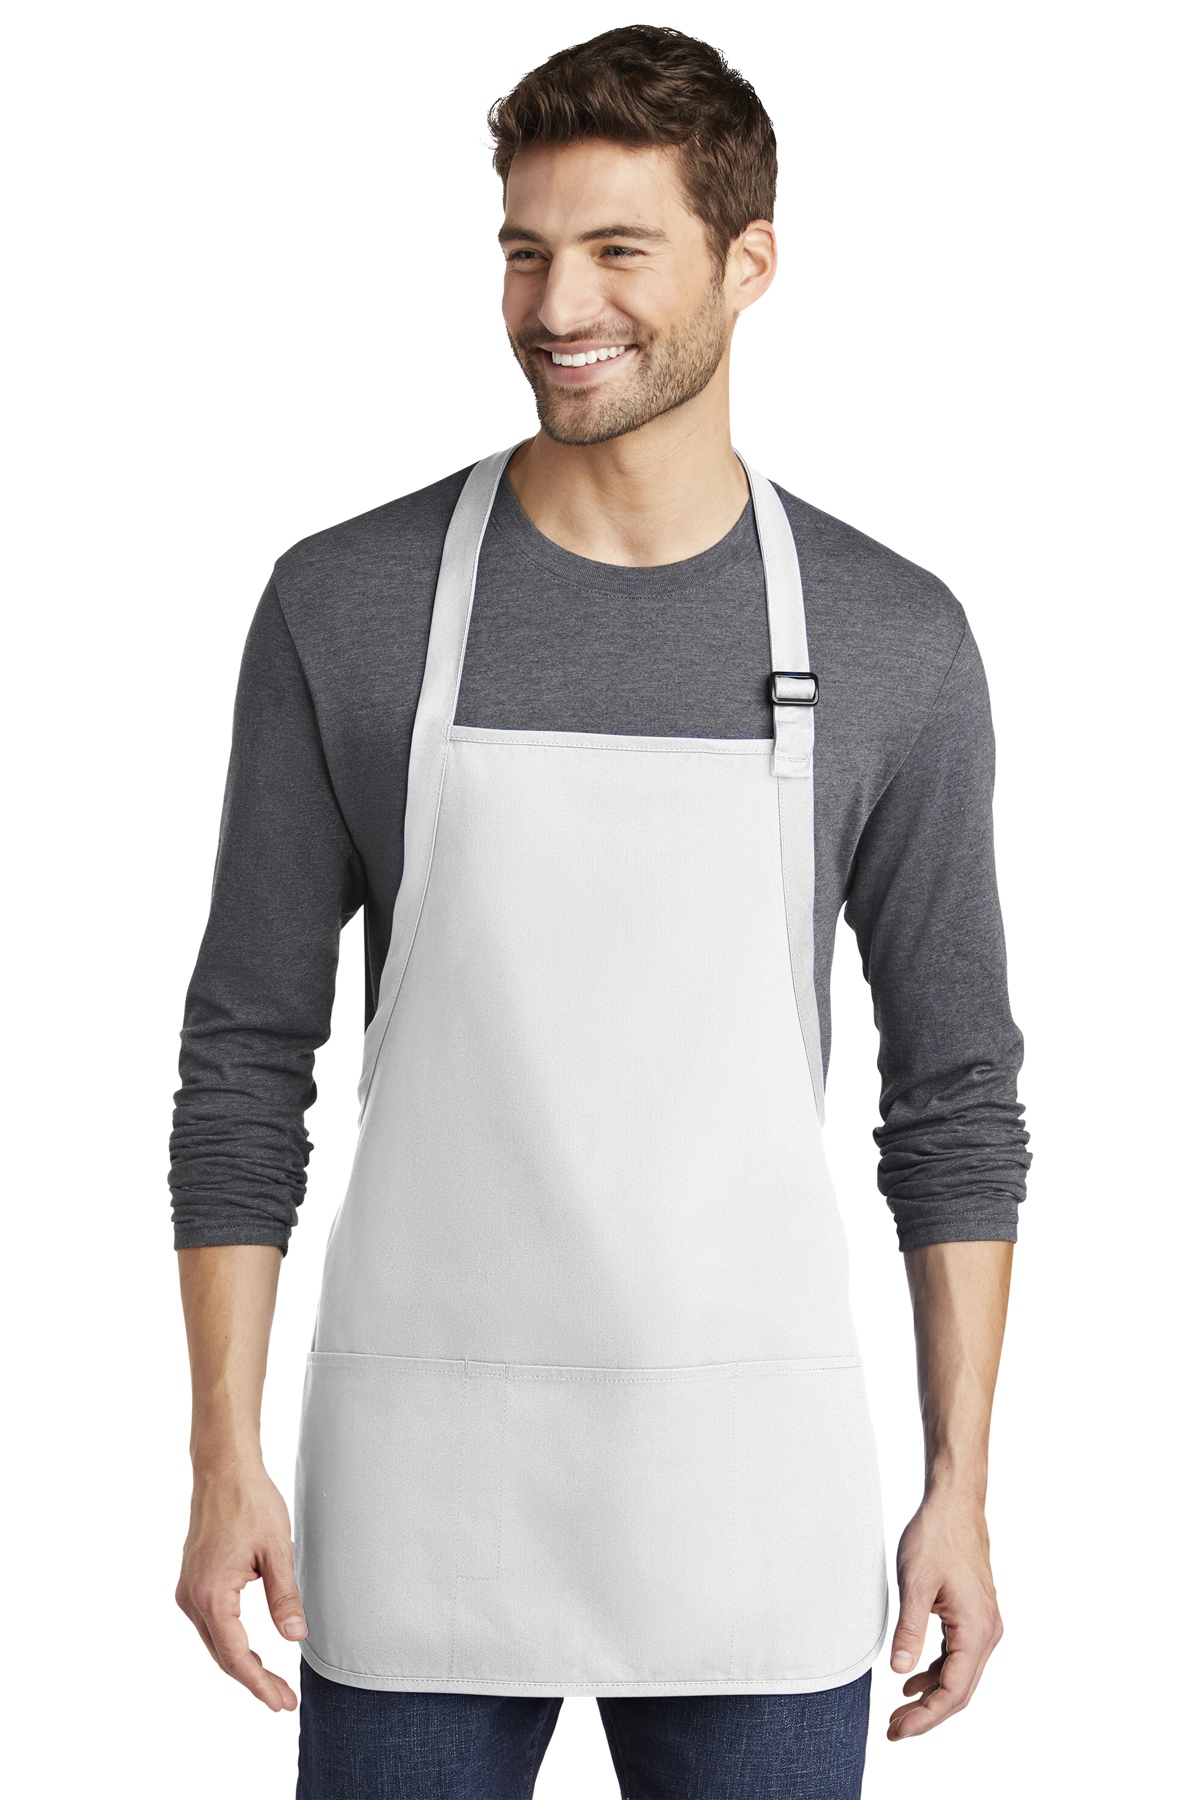 Port Authority Medium-Length Apron with Pouch Pockets | Product 